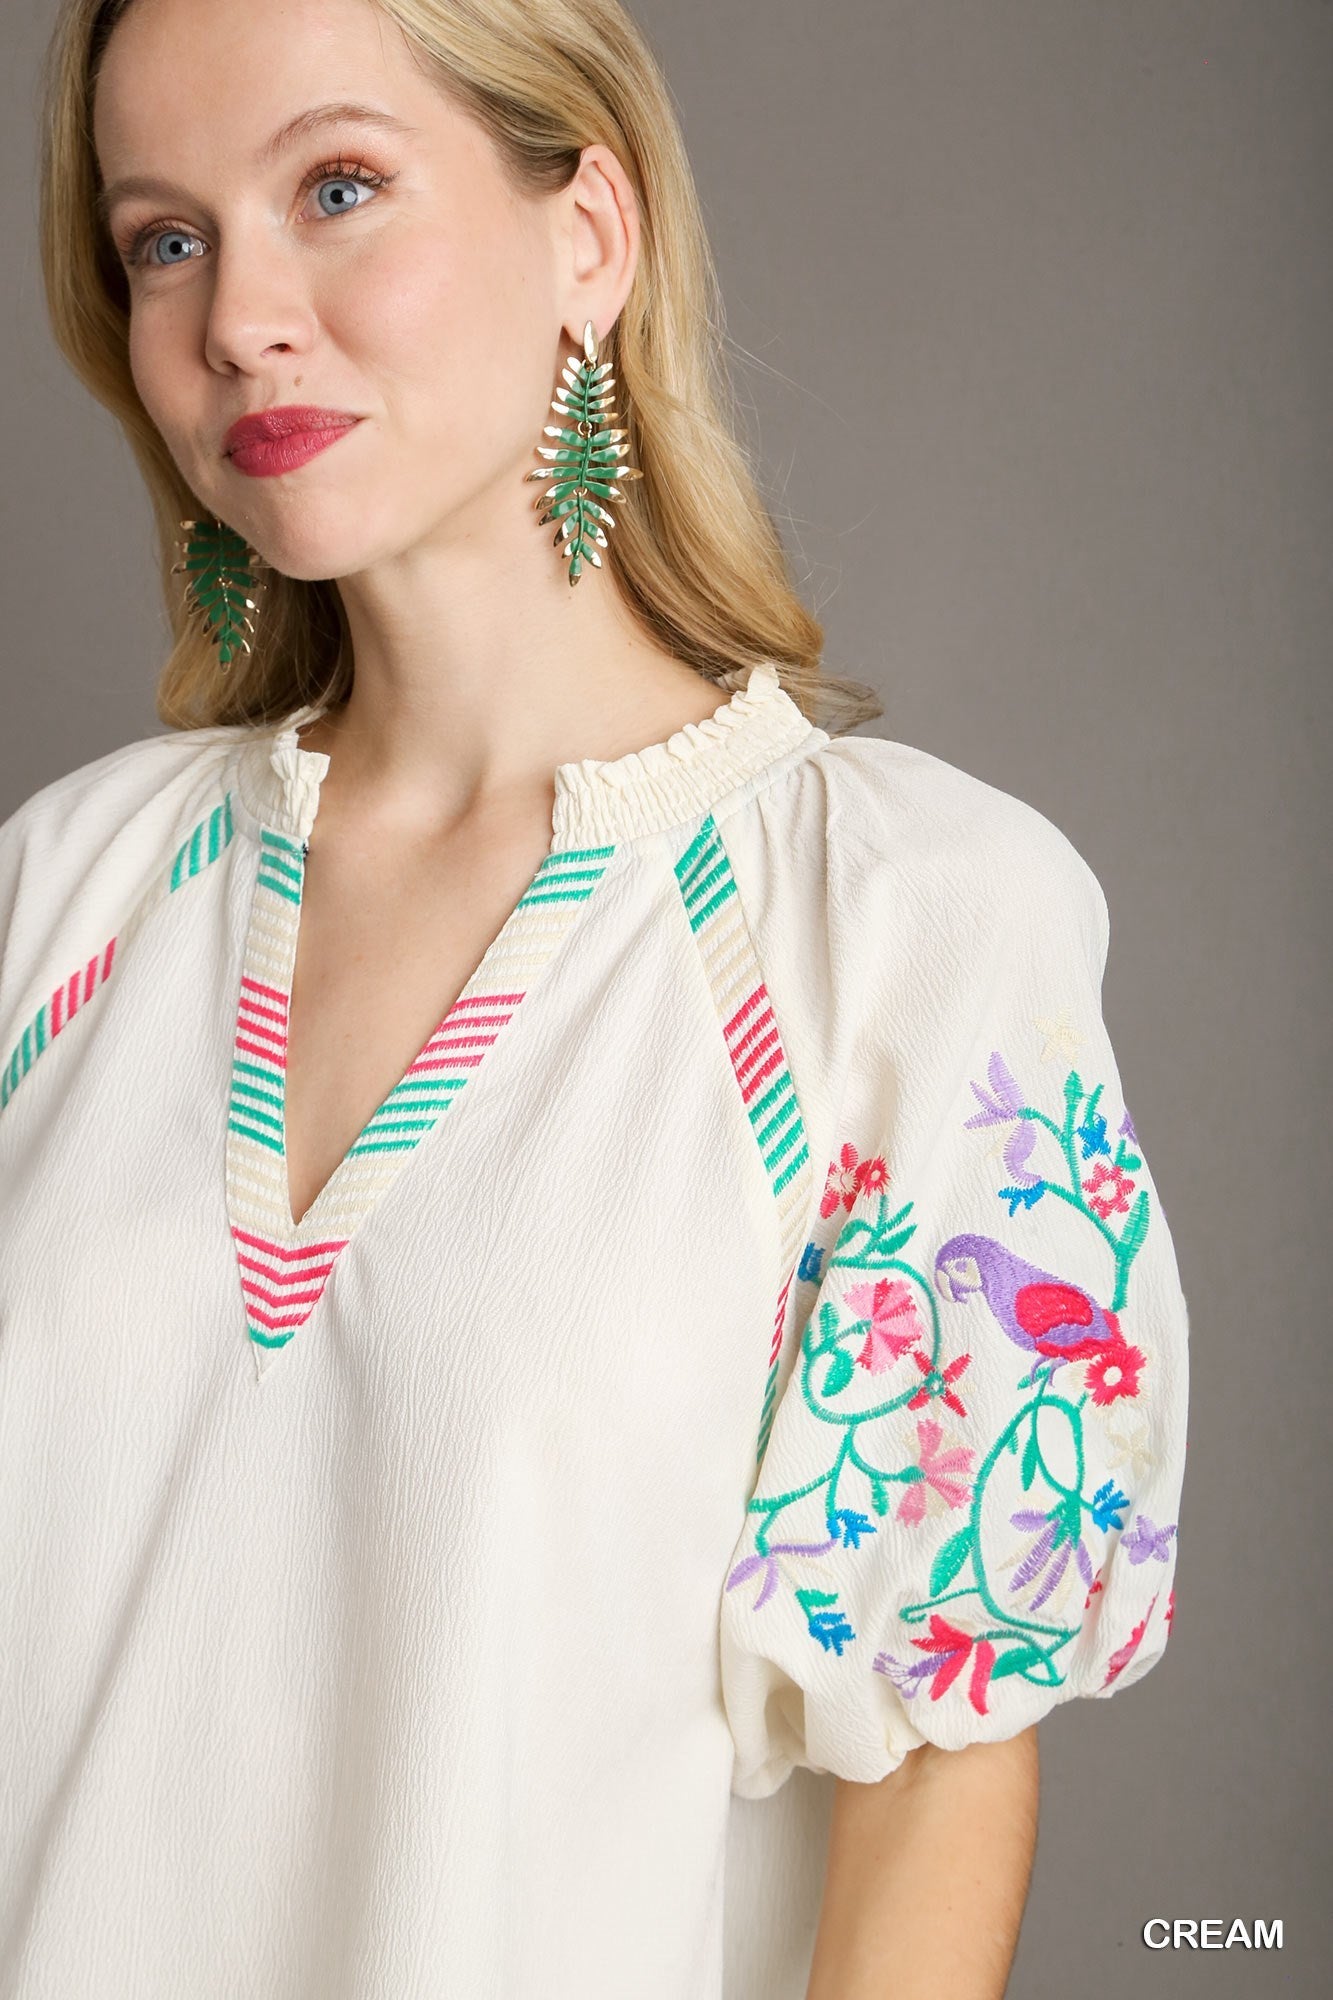 Cream V-Neck Top w/ Embroidery Detailed Sleeves